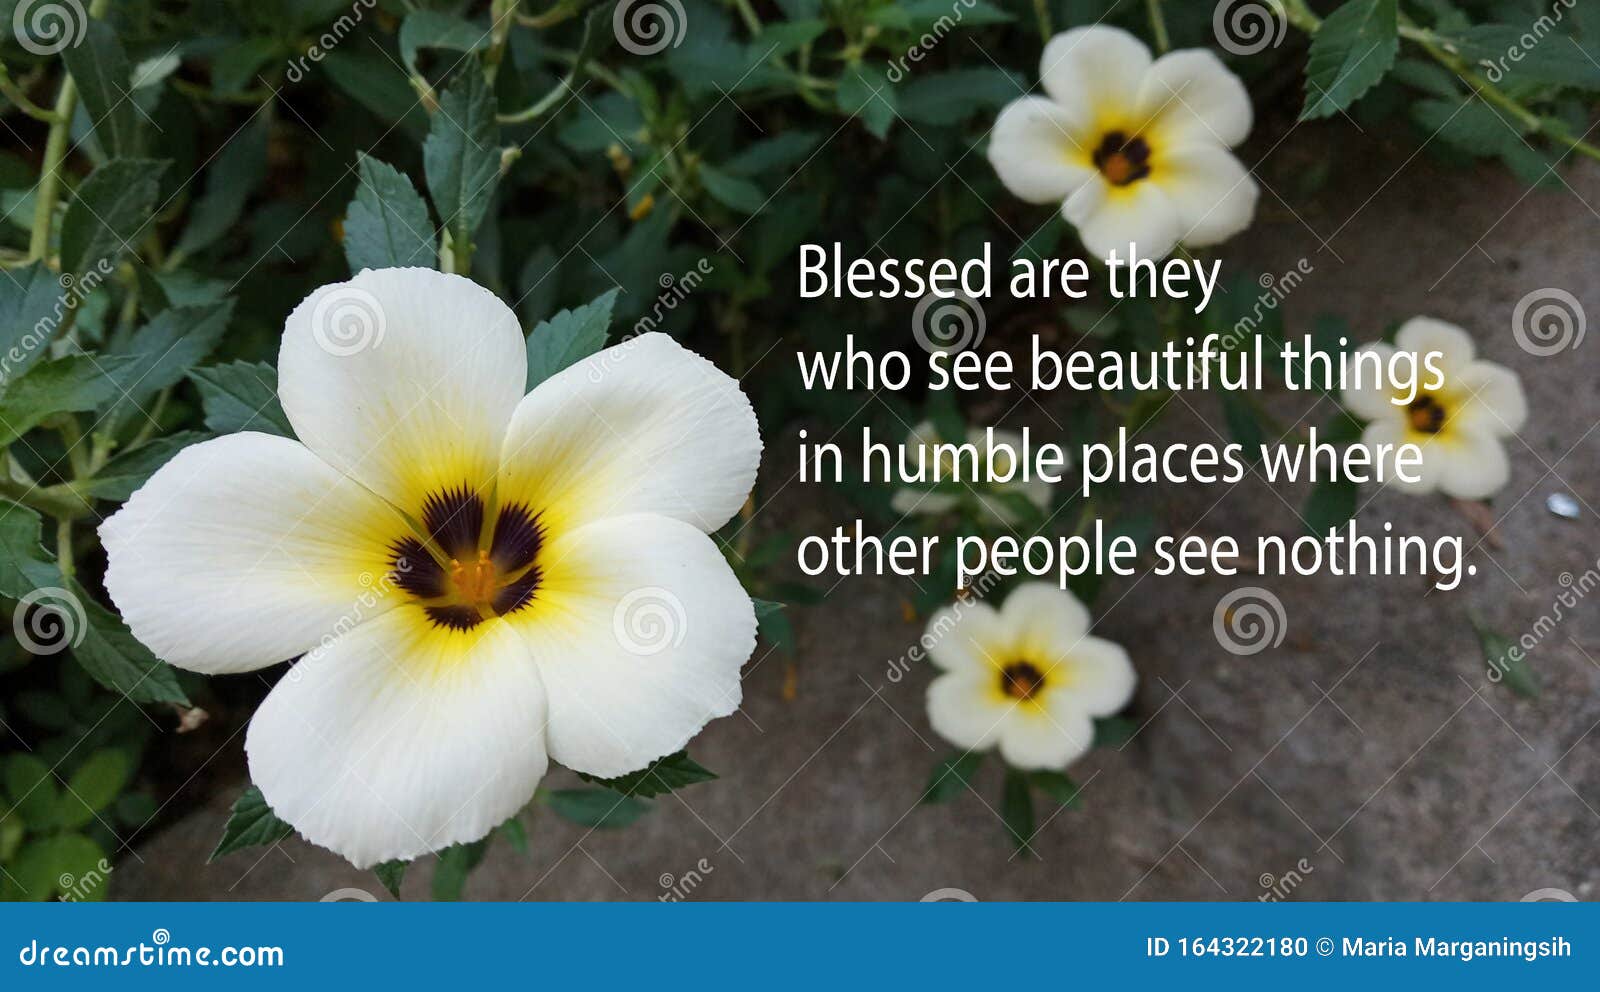 inspirational quote - blessed are they who see beautiful things in humble places where other people see nothing.